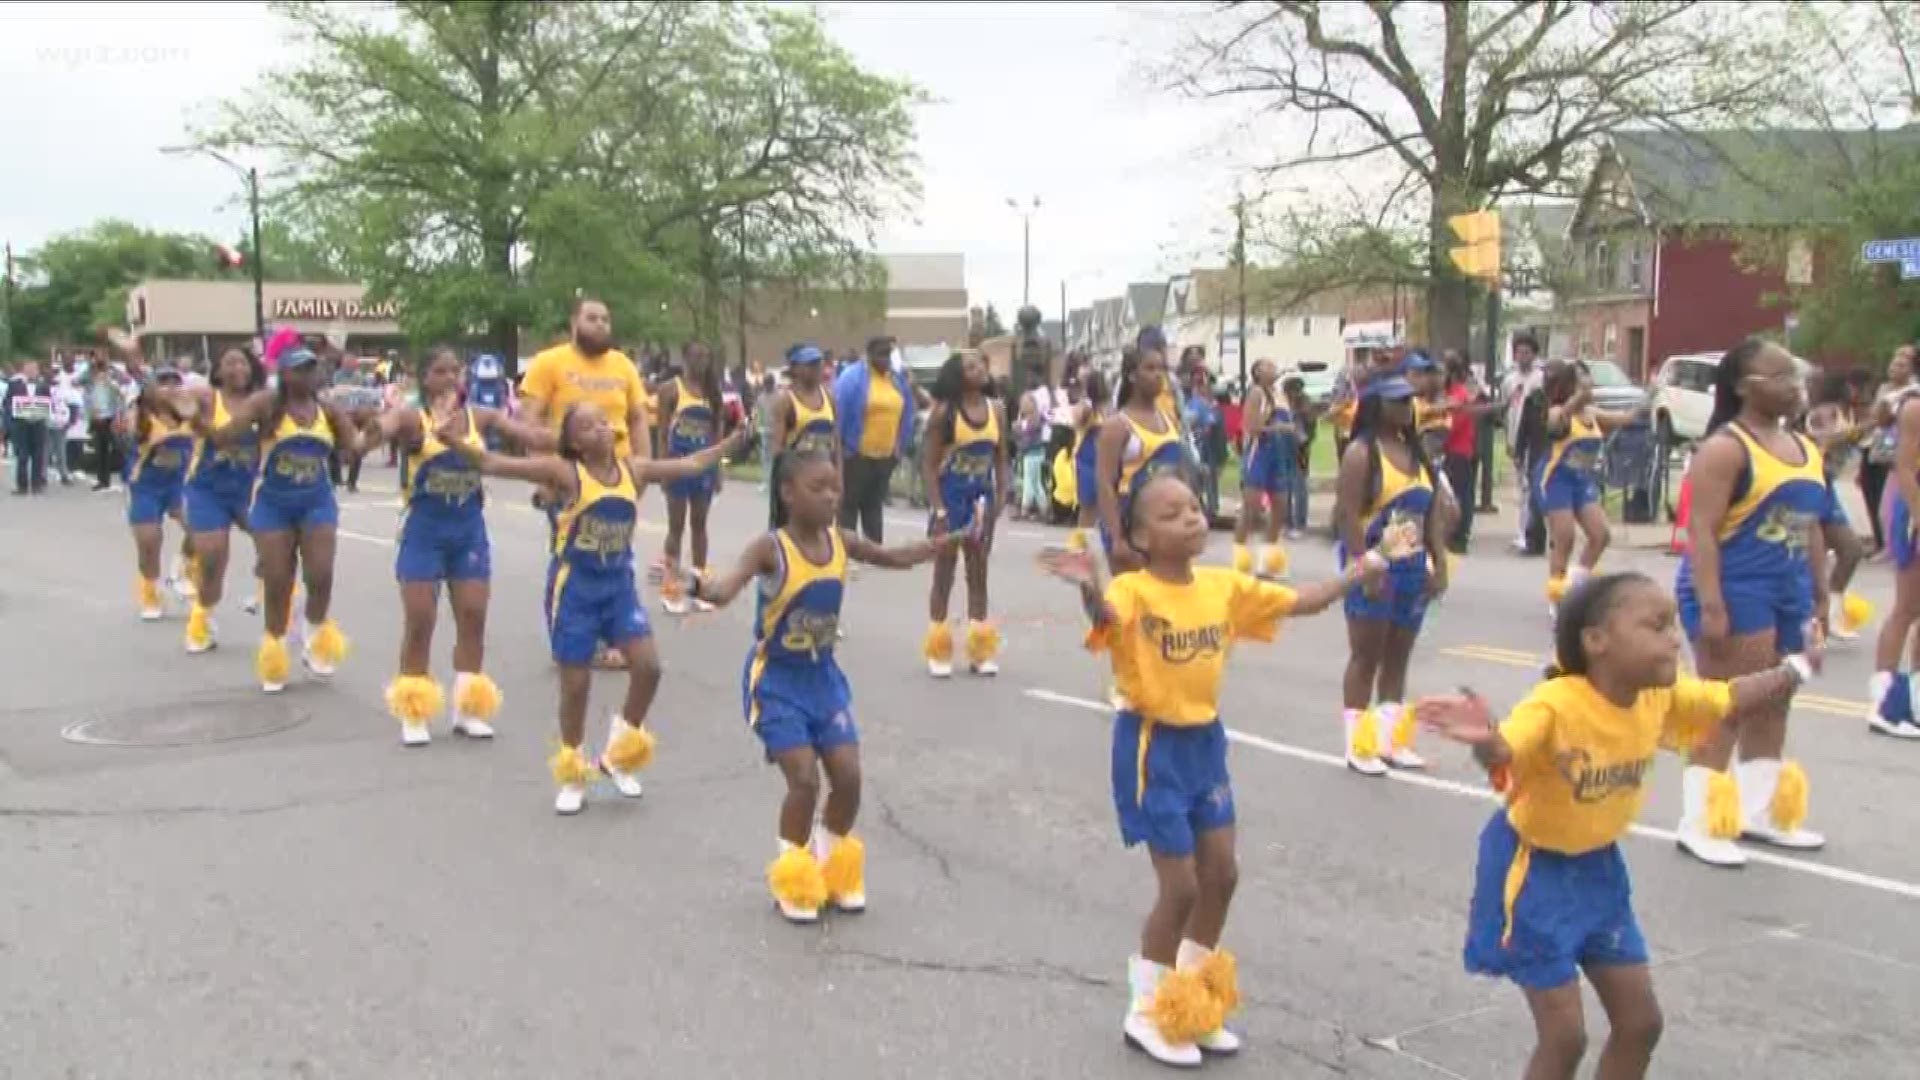 44 years of the Juneteenth festival celebrating African American Culture in Buffalo. Today's Festival kicked off with a parade down Genesee St. The streets lined with people of all ages watching.